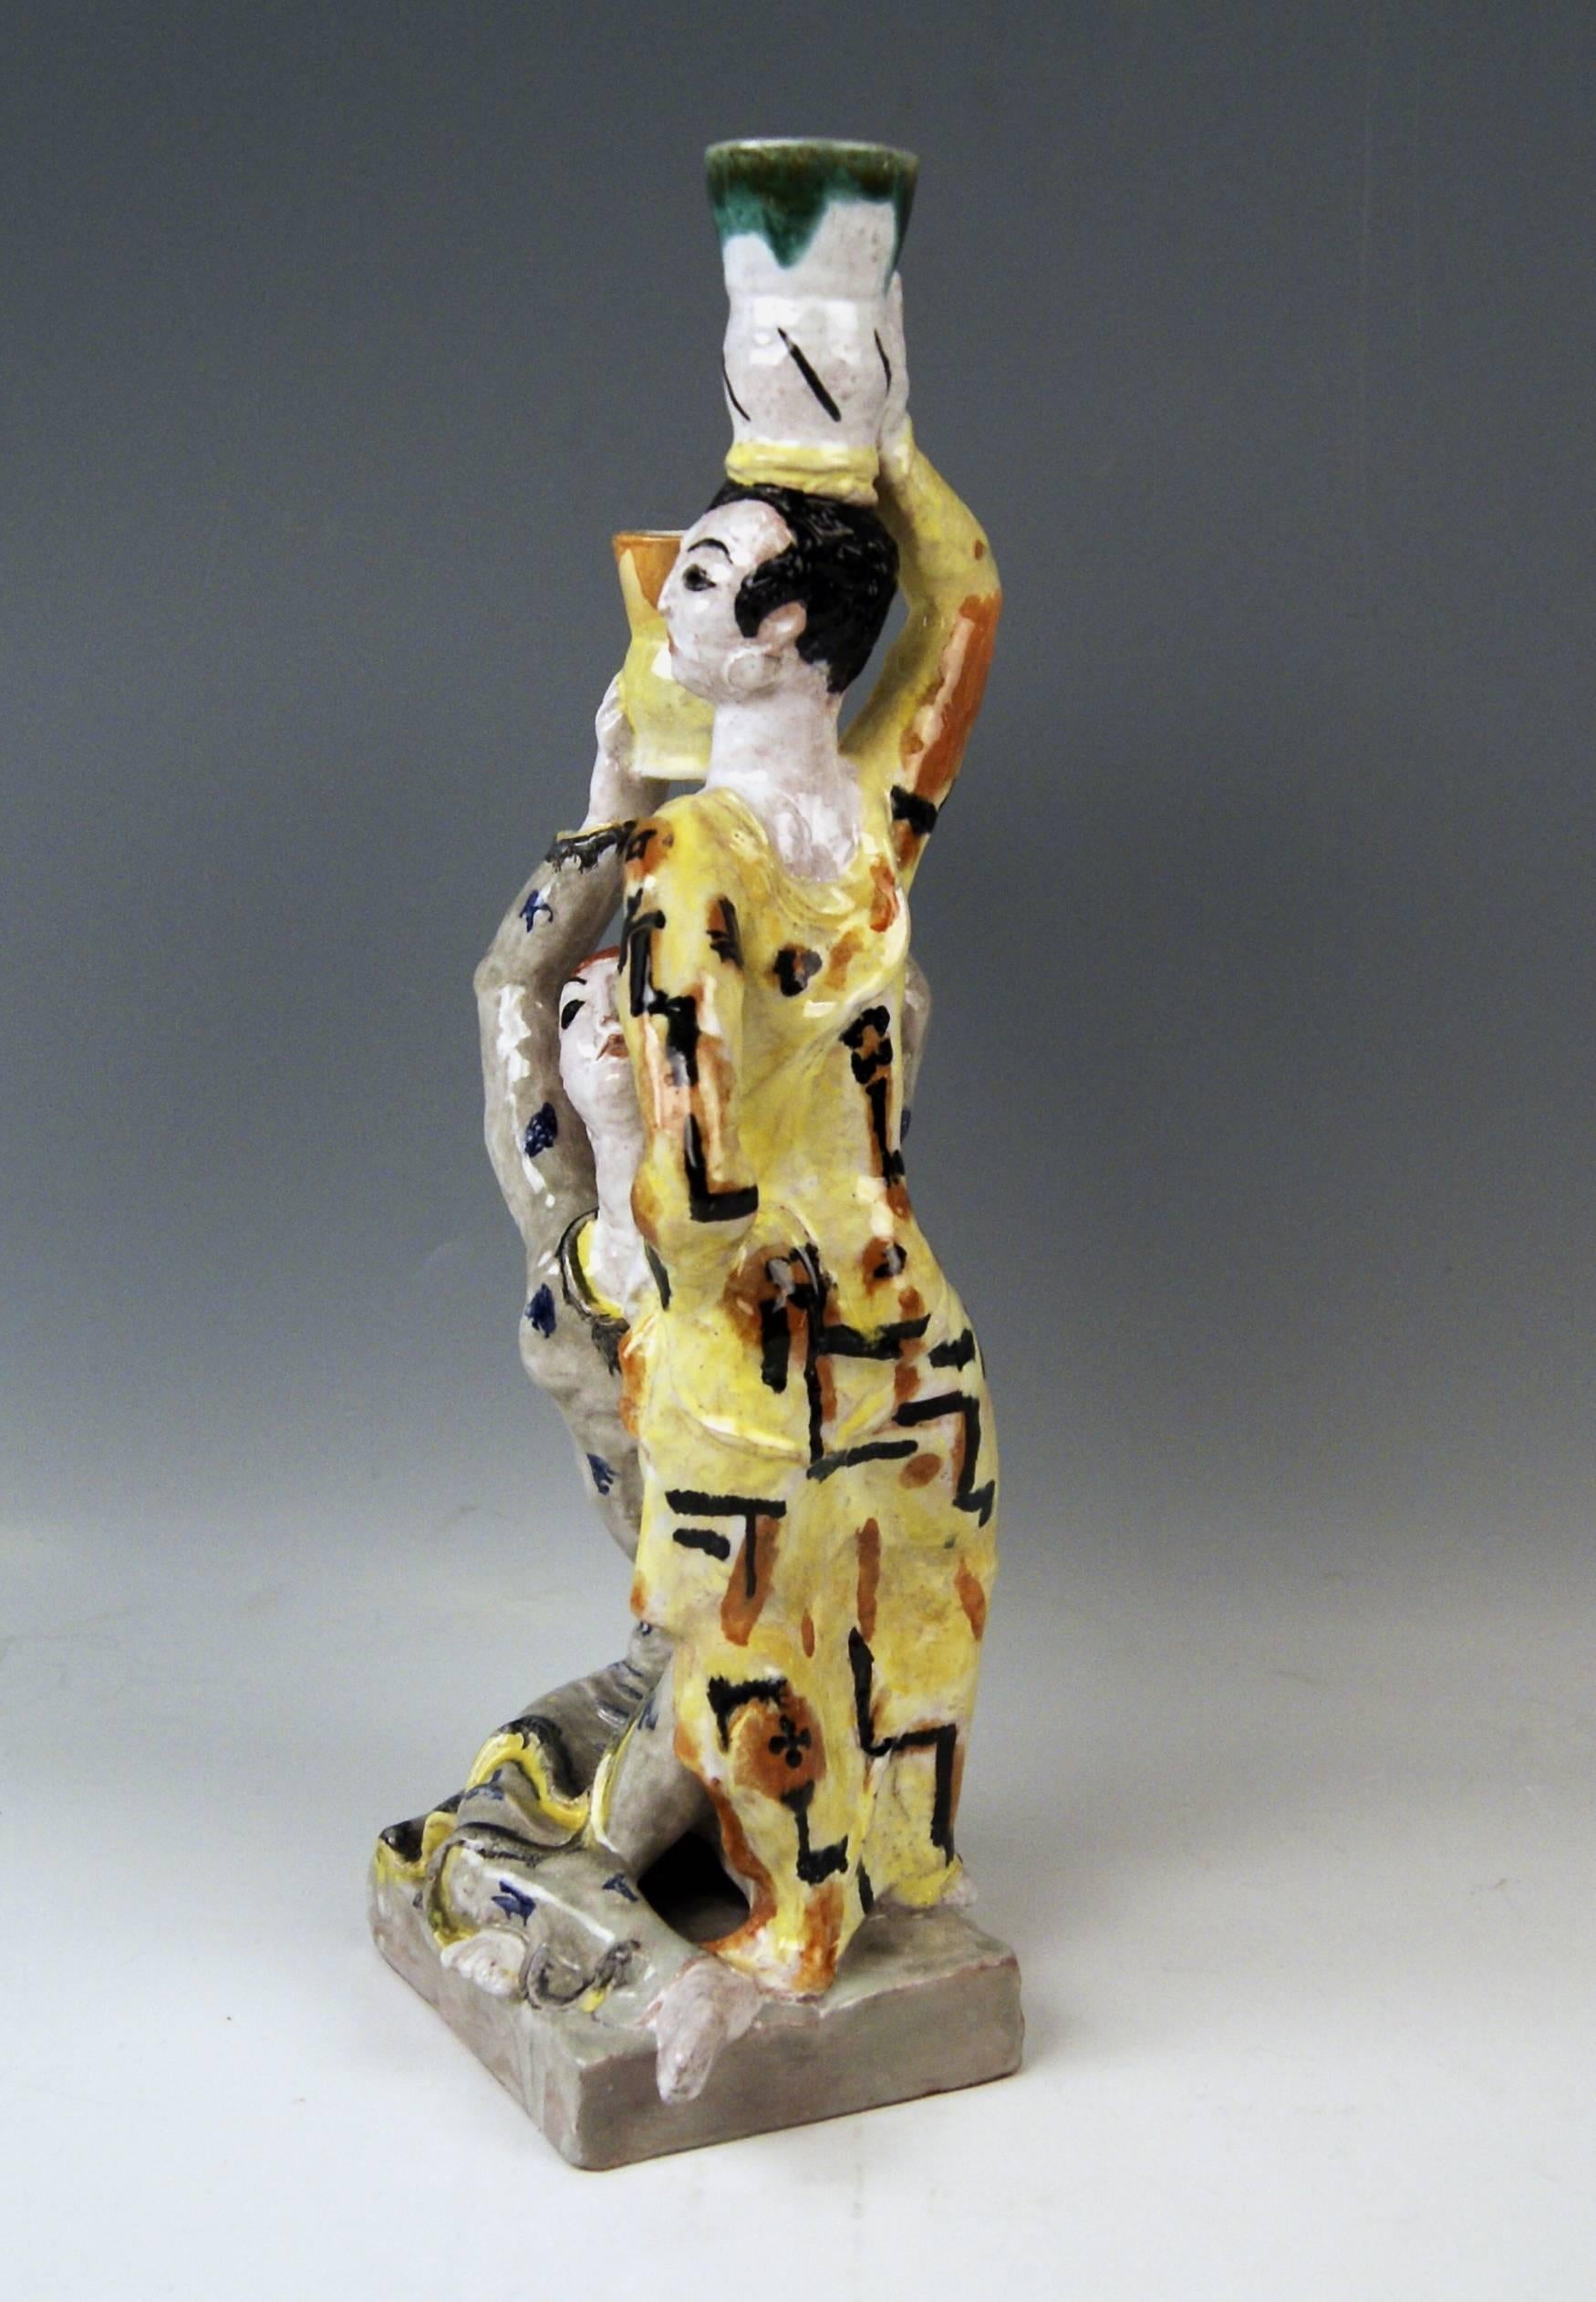 Two Figurines Wearing Vessels  (Expressionism)  made by WIENER WERKSTAETTE   (= Vienna Workshop).

DESIGN: 
ERNA KOPRIVA  (born 1894 in Vienna – died 1984 there).
Born in Vienna as daughter of a medical doctor, Erna Kopriva has become pupil of